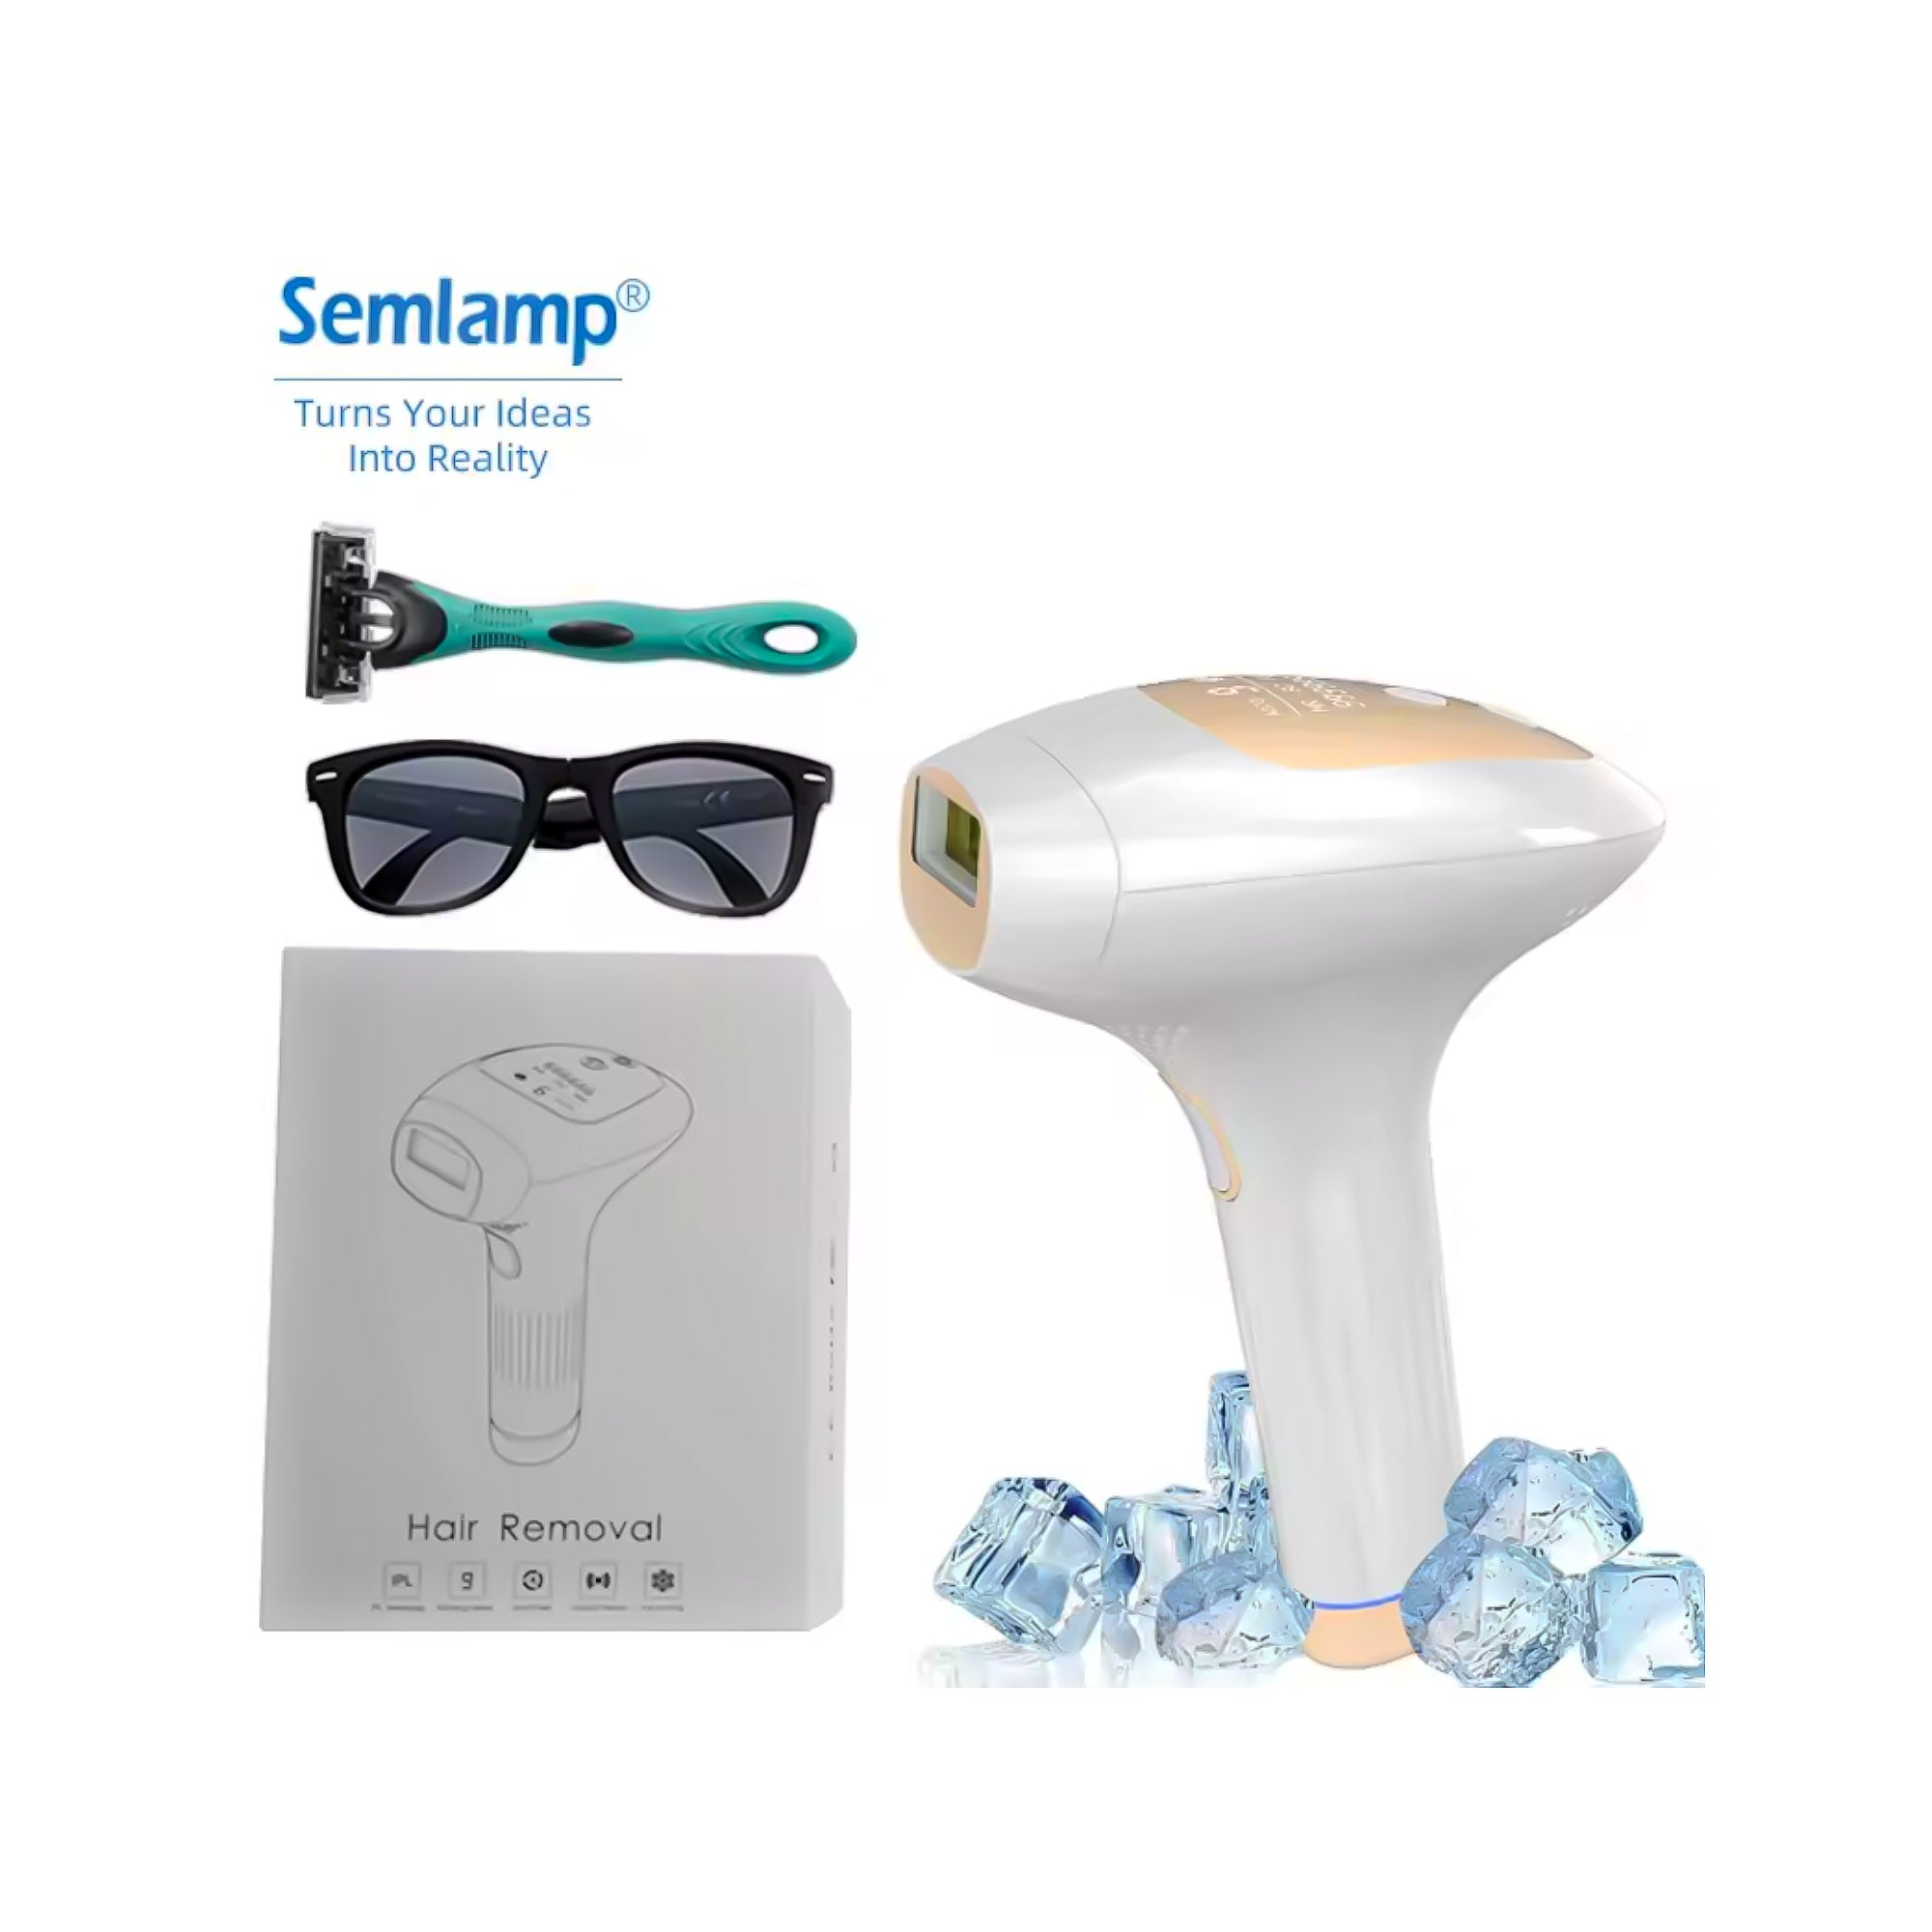 Portable Sapphire Ice Cool Ipl Hair Removal Device Painless Home Ipl Hair Removal Machine